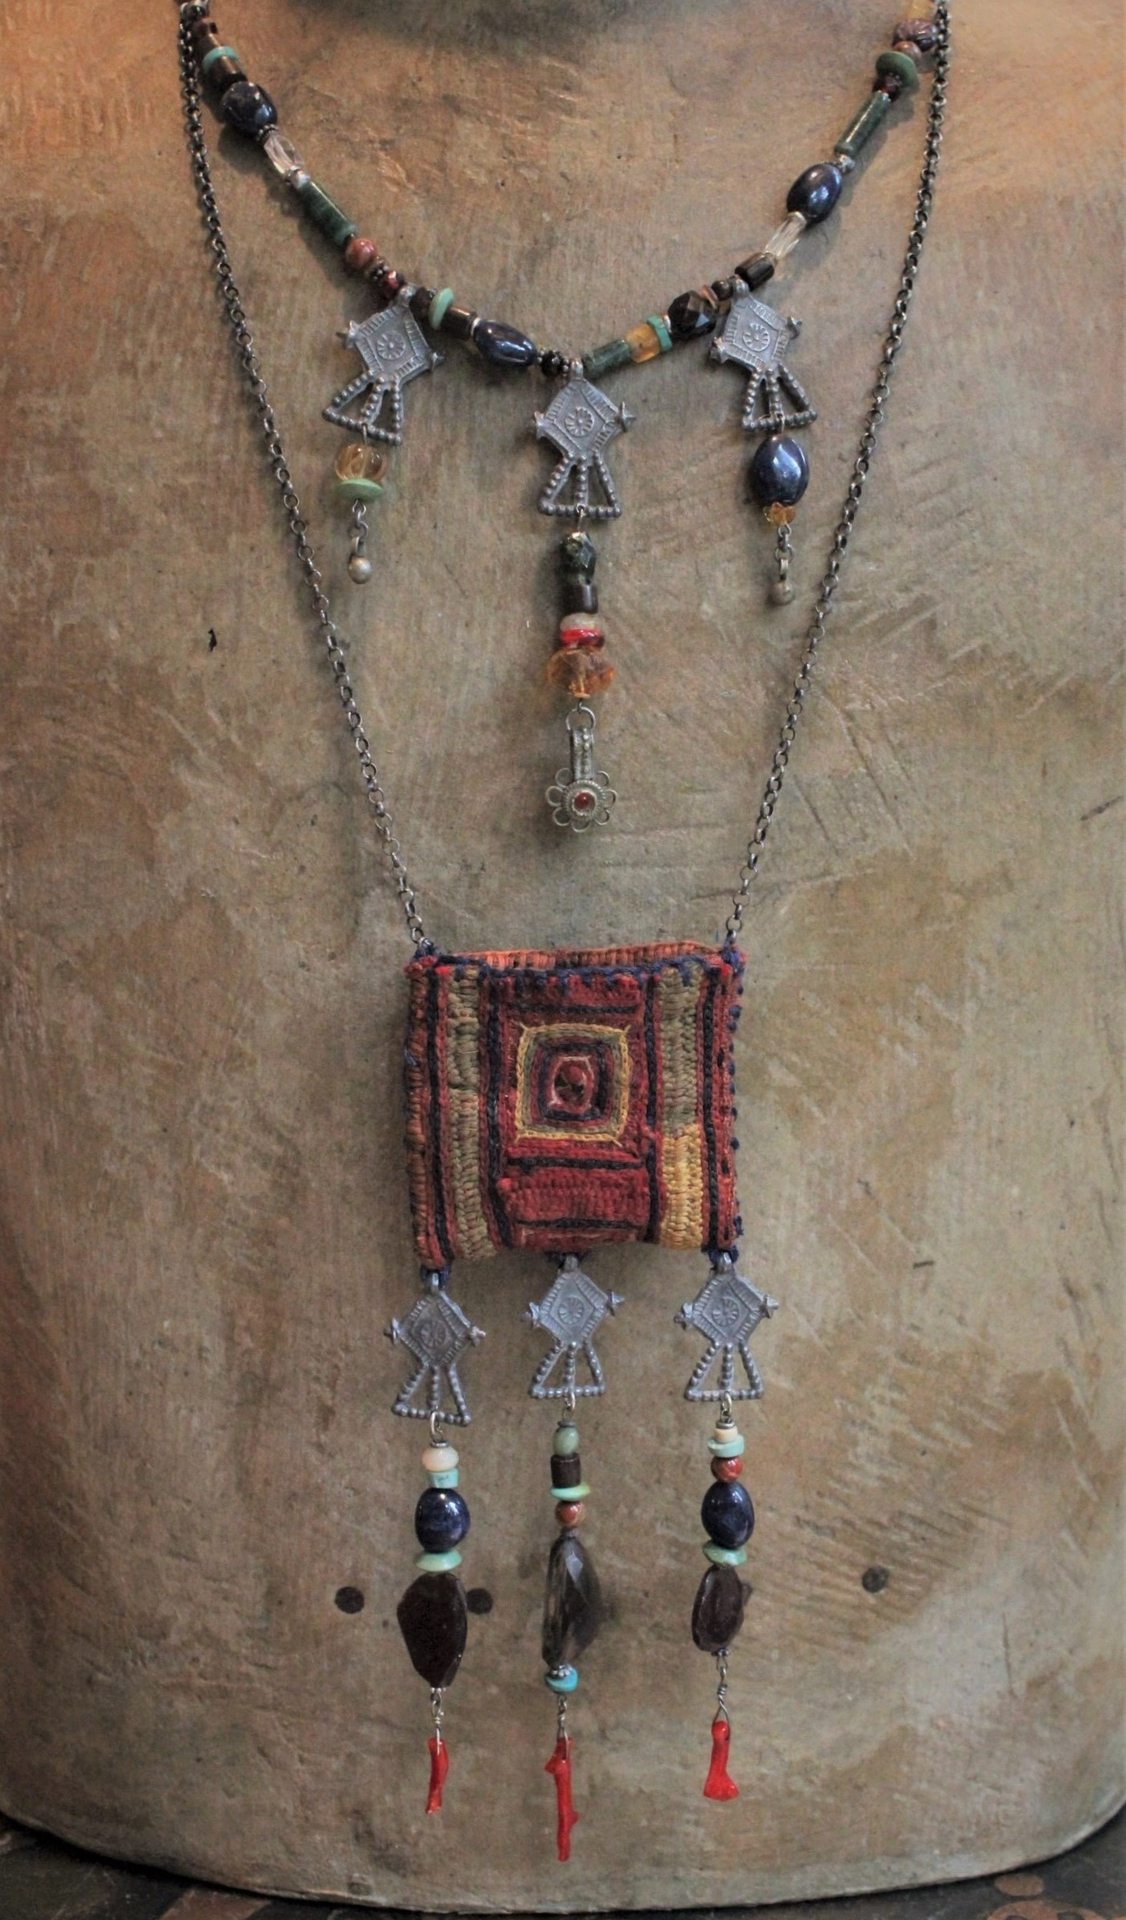 Antique Blessing Bag 2 Strand Necklace with Antique Gypsy Textile,Multiple Gemstones,Antique Gypsy Cross Findings,Sterling Chain & Sterling Toggle Clasp